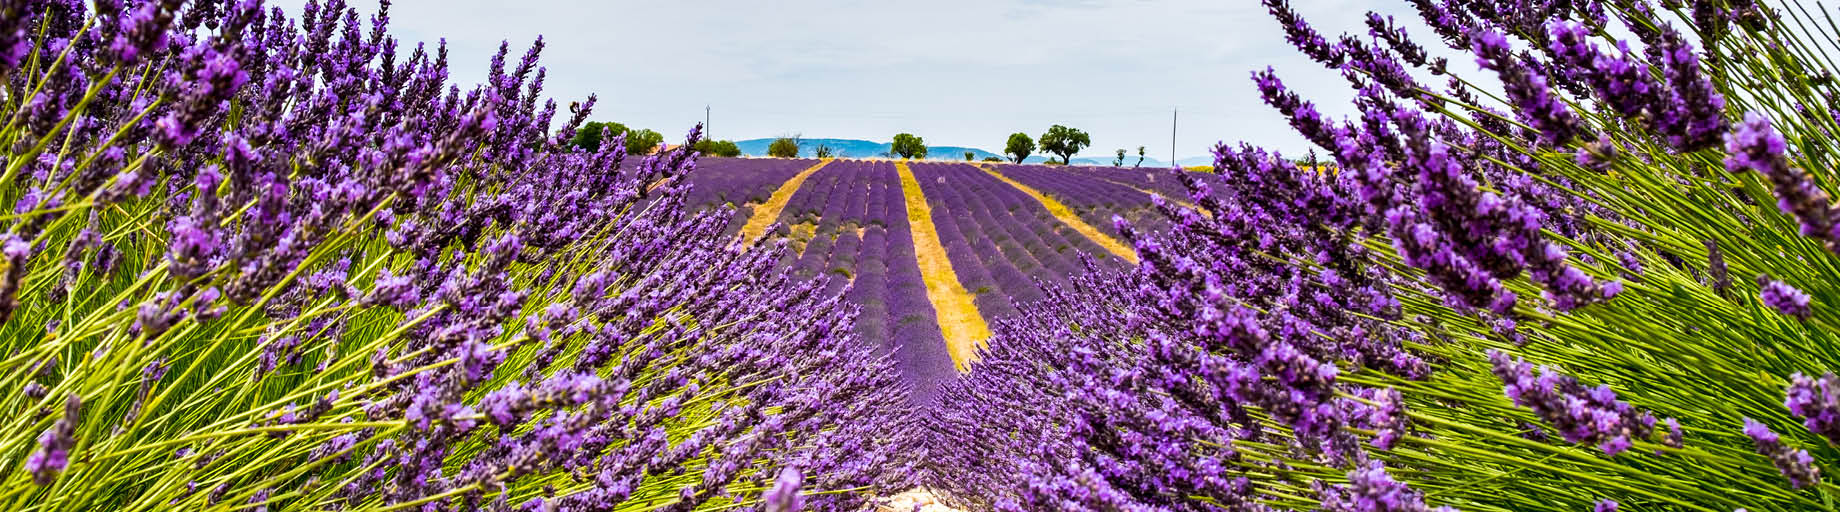 Hidden Gems of the Dordogne and Provence, France with Annee Kelly